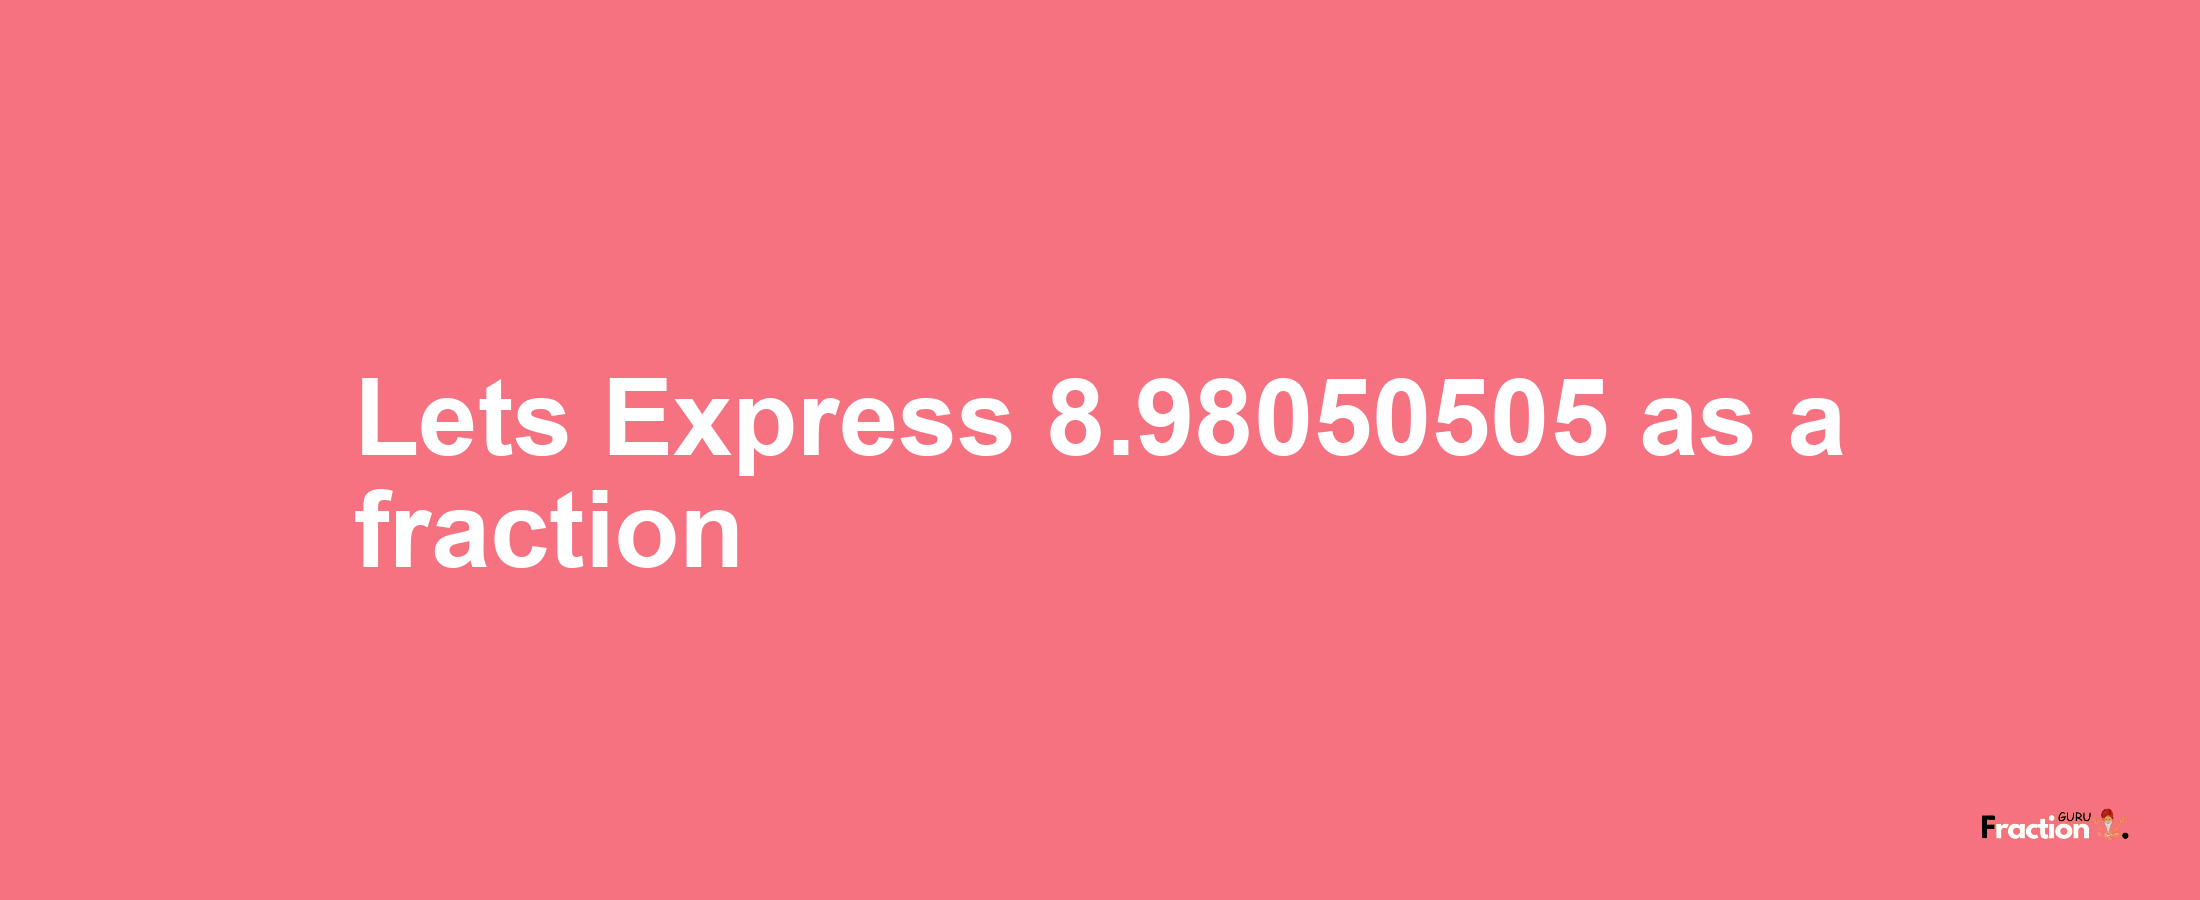 Lets Express 8.98050505 as afraction